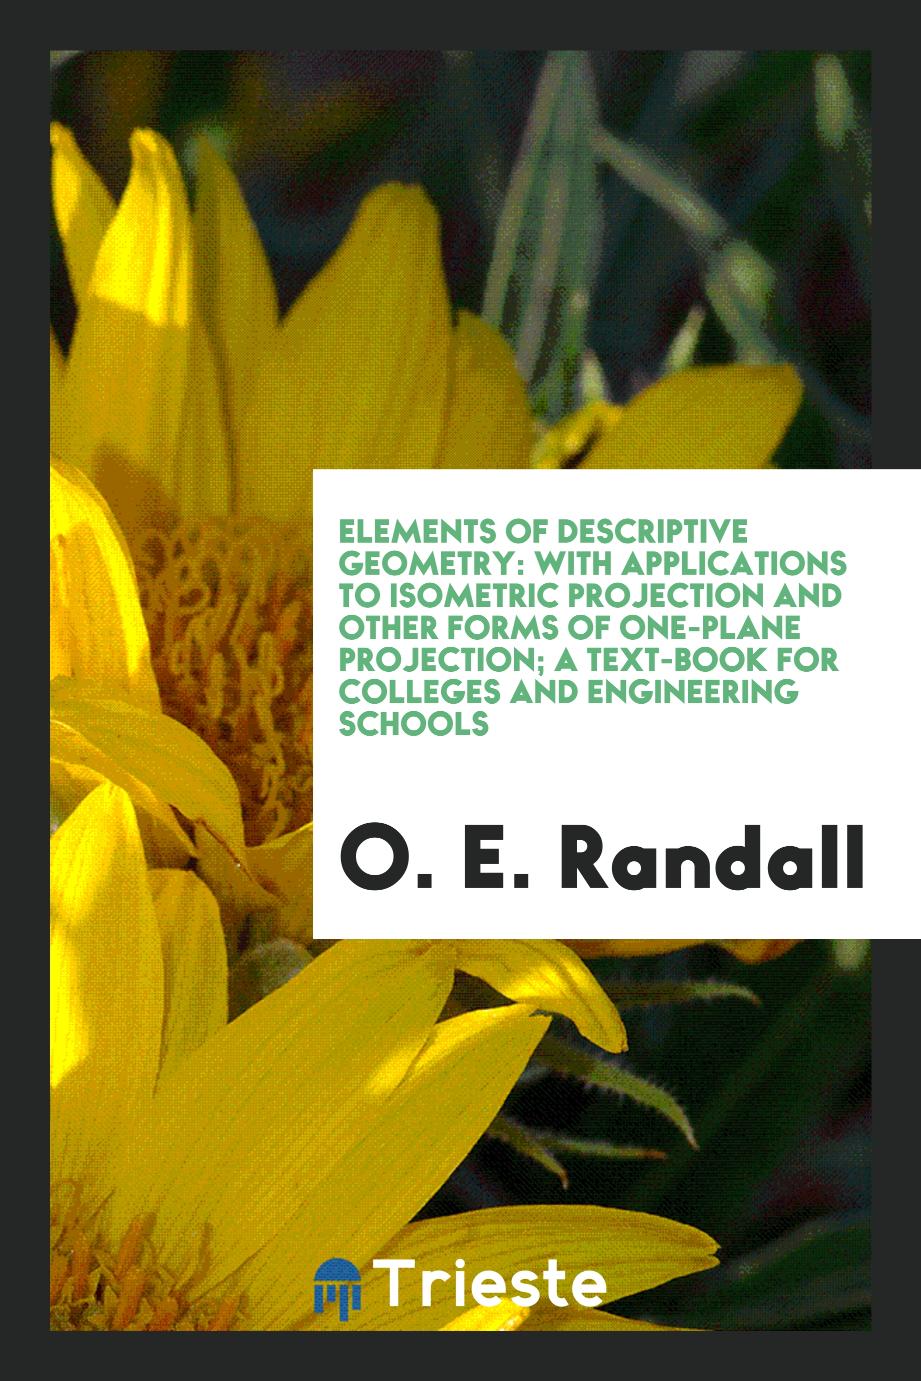 Elements of Descriptive Geometry: With Applications to Isometric Projection and Other Forms of One-Plane Projection; A Text-Book for Colleges and Engineering Schools